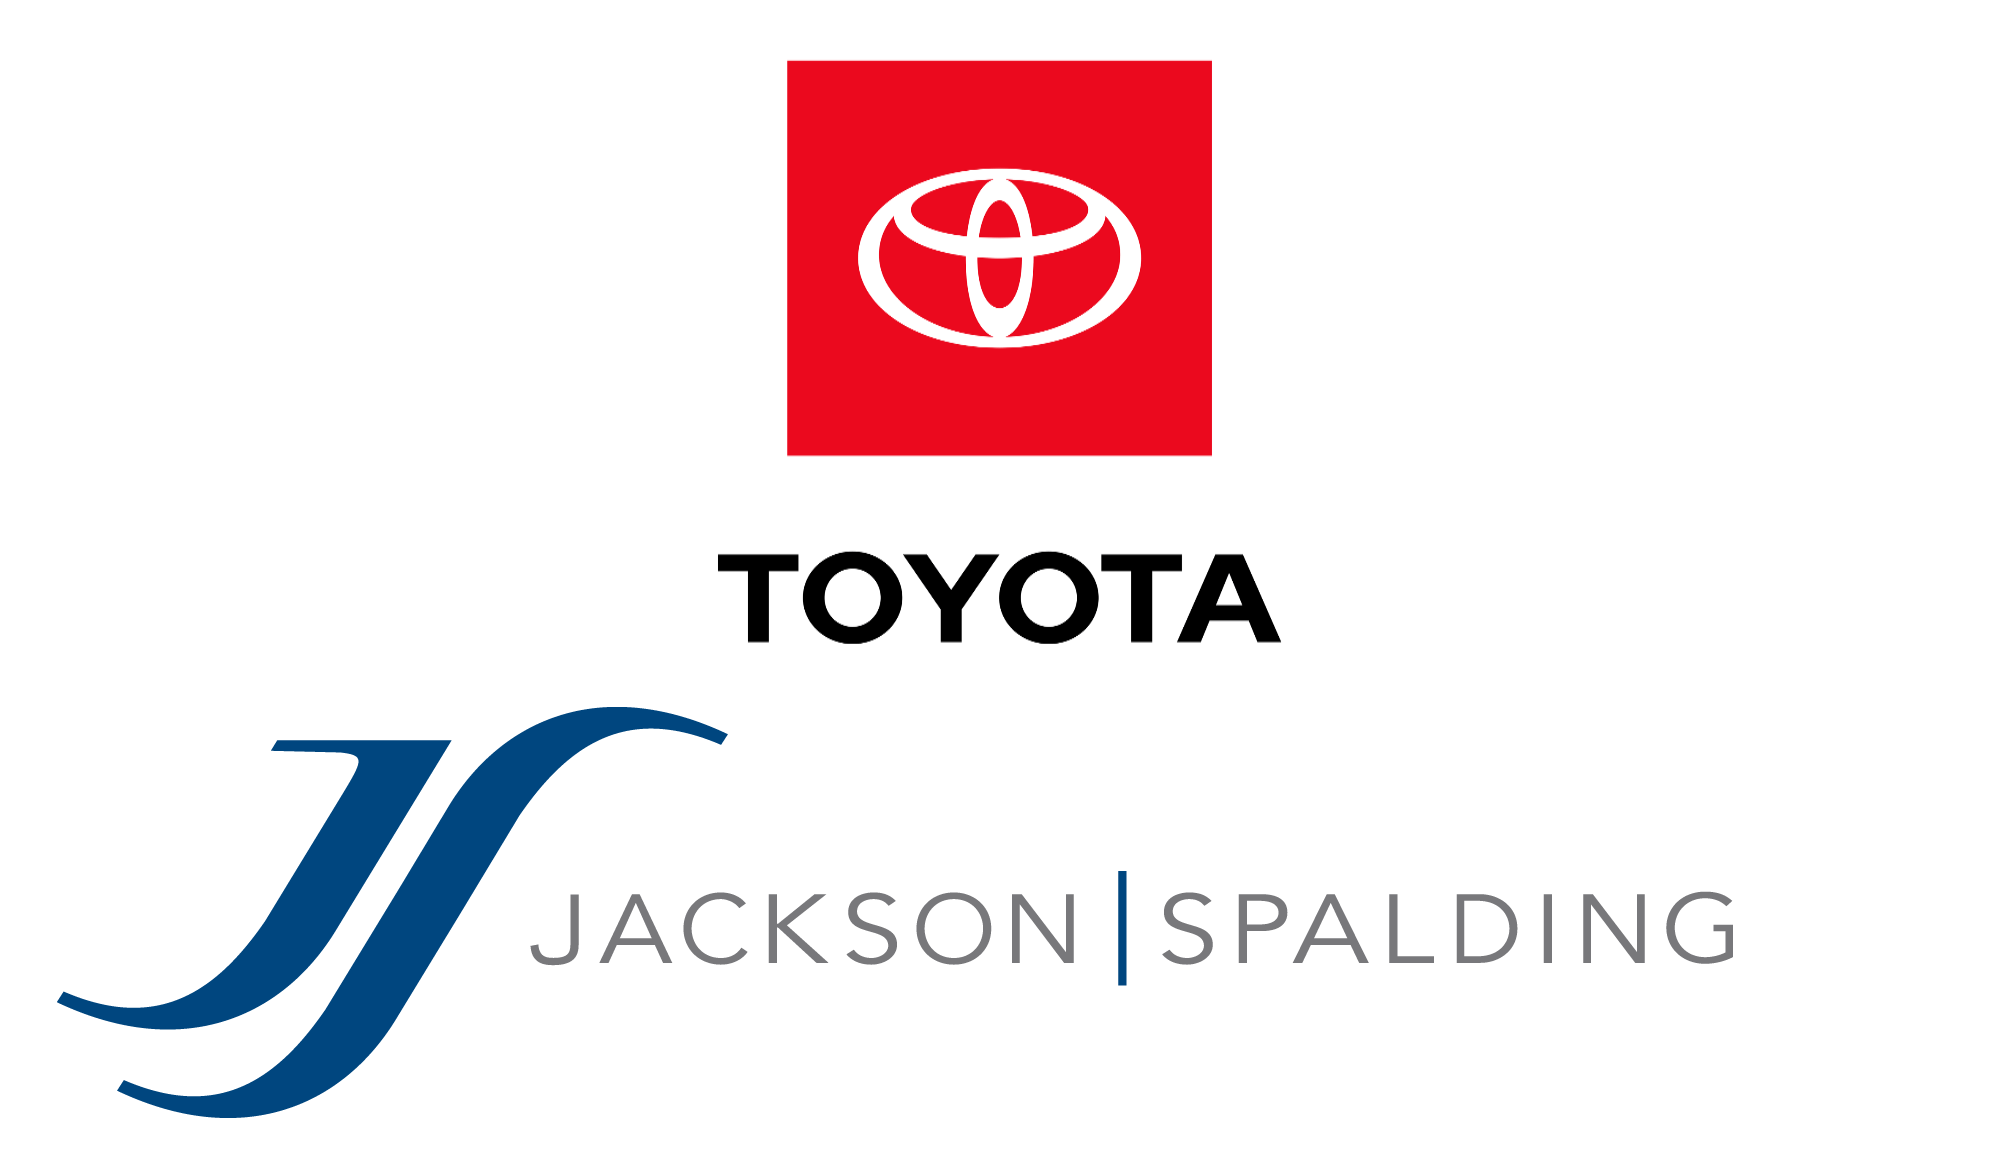 Don't Risk It, Fix It: Takata Airbag Recall - Logo - https://s41078.pcdn.co/wp-content/uploads/2020/03/Crisis_Toyota-Jackson-Spalding.png